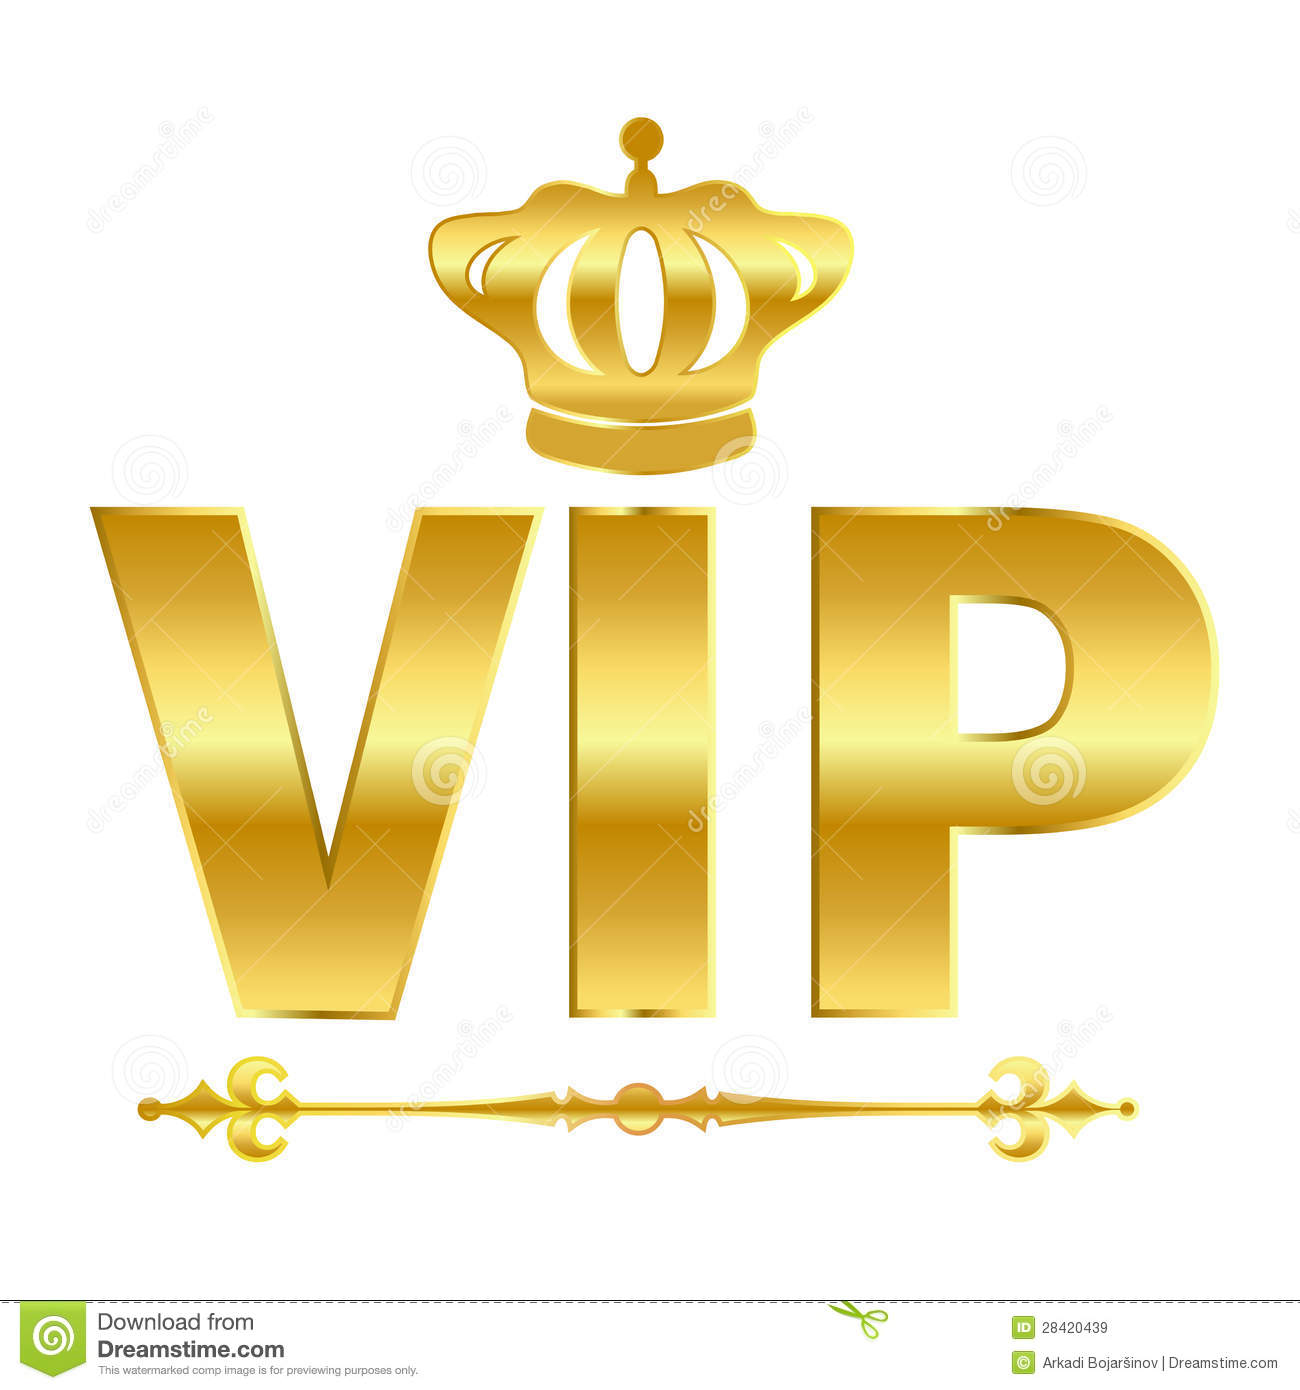 Vip Vector Symbol Royalty Free Stock Images   Image  28420439